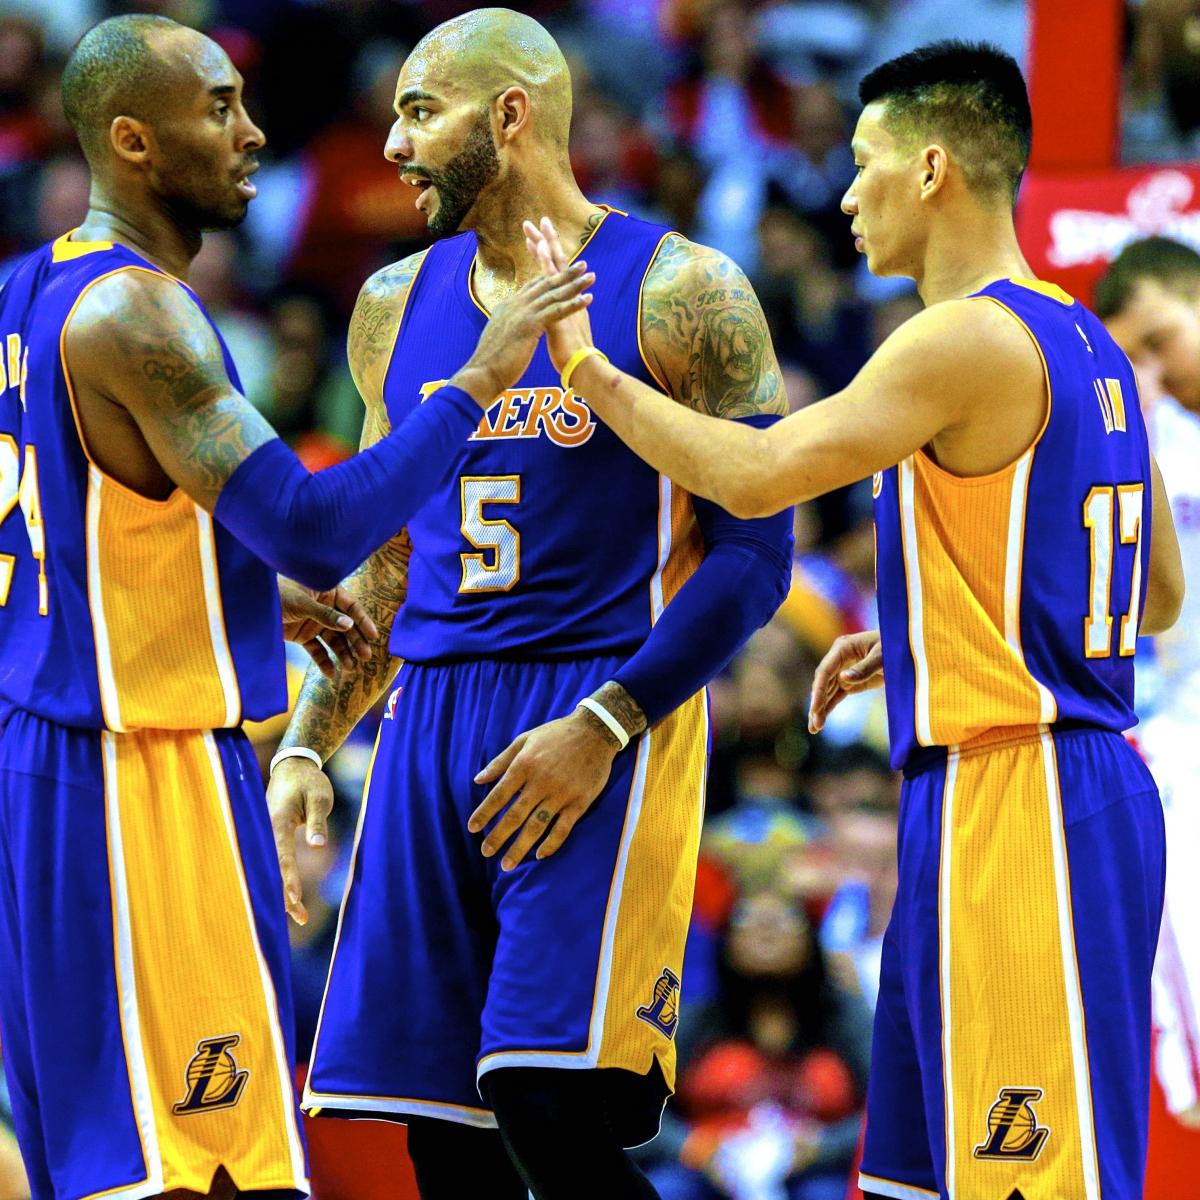 Los Angeles Lakers vs. Houston Rockets: Live Score, Highlights and Analysis | Bleacher ...